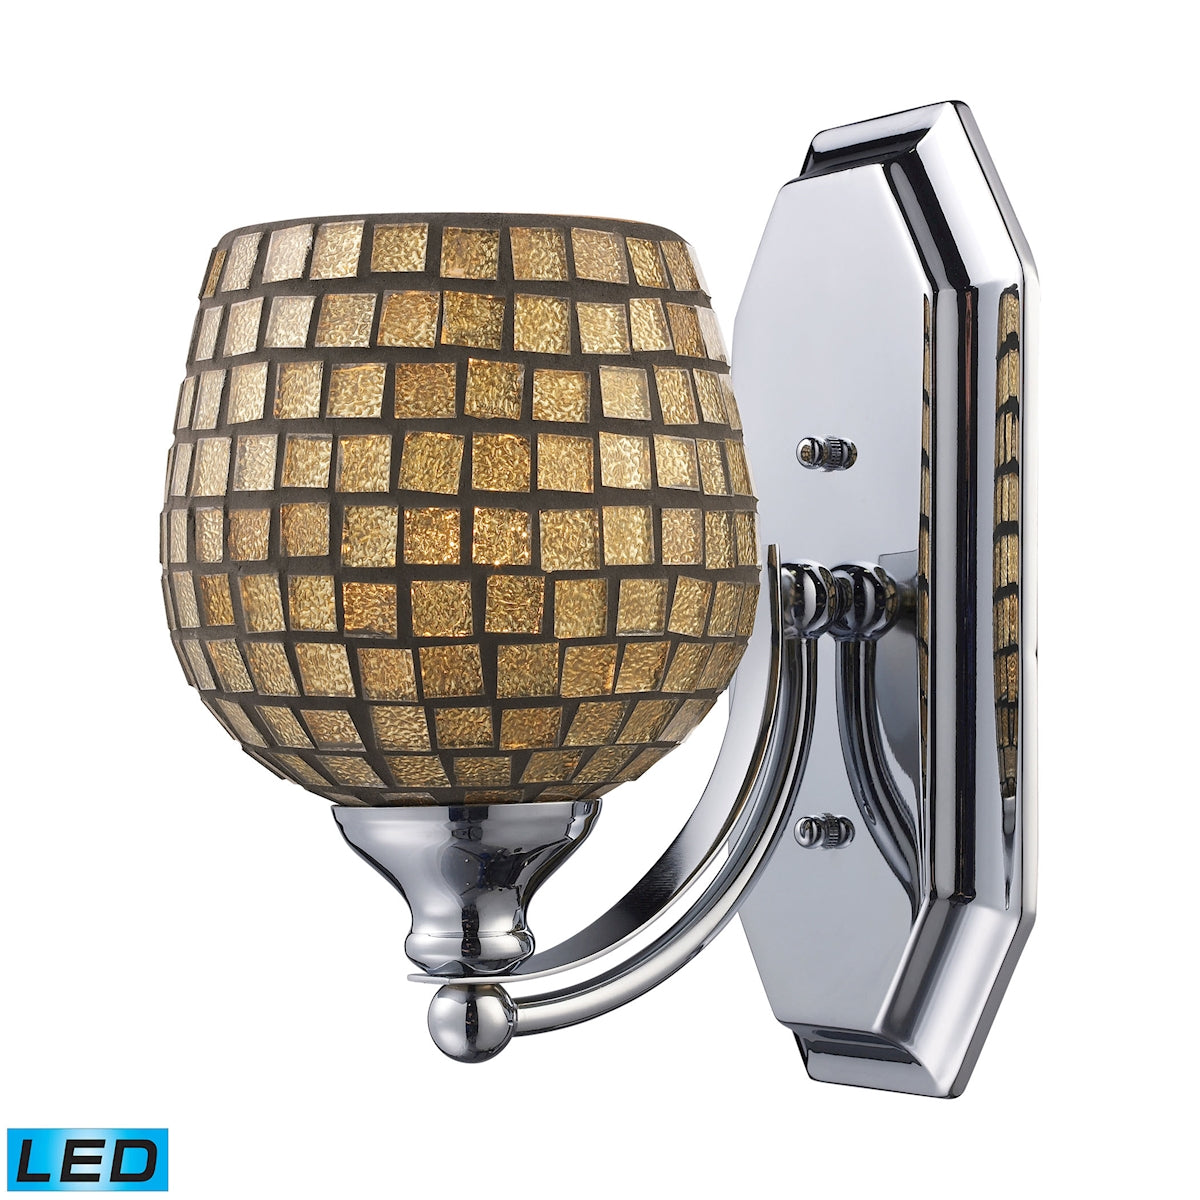 ELK Lighting 570-1N-GLD-LED Mix-N-Match Vanity 1-Light Wall Lamp in Satin Nickel with Gold Leaf Glass - Includes LED Bulb